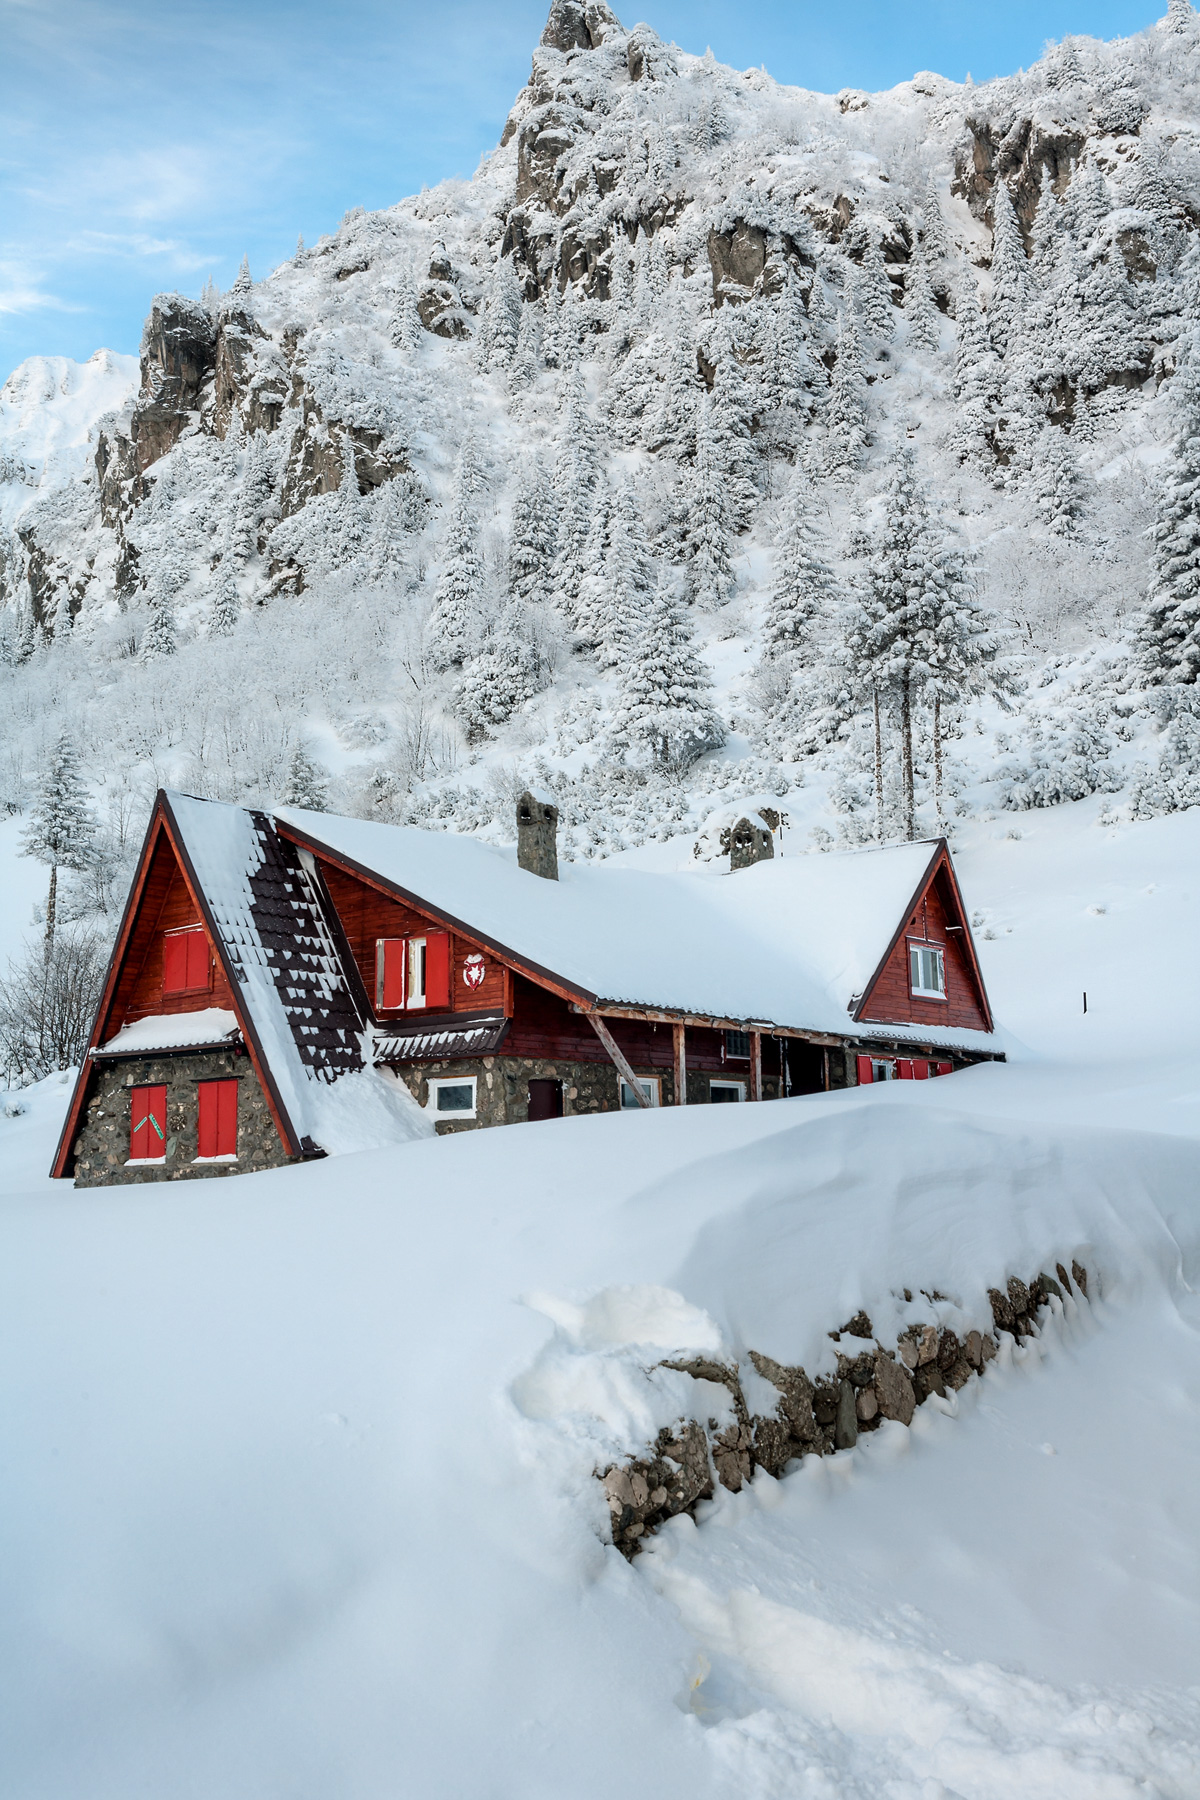 Alpine scenery and a chalet